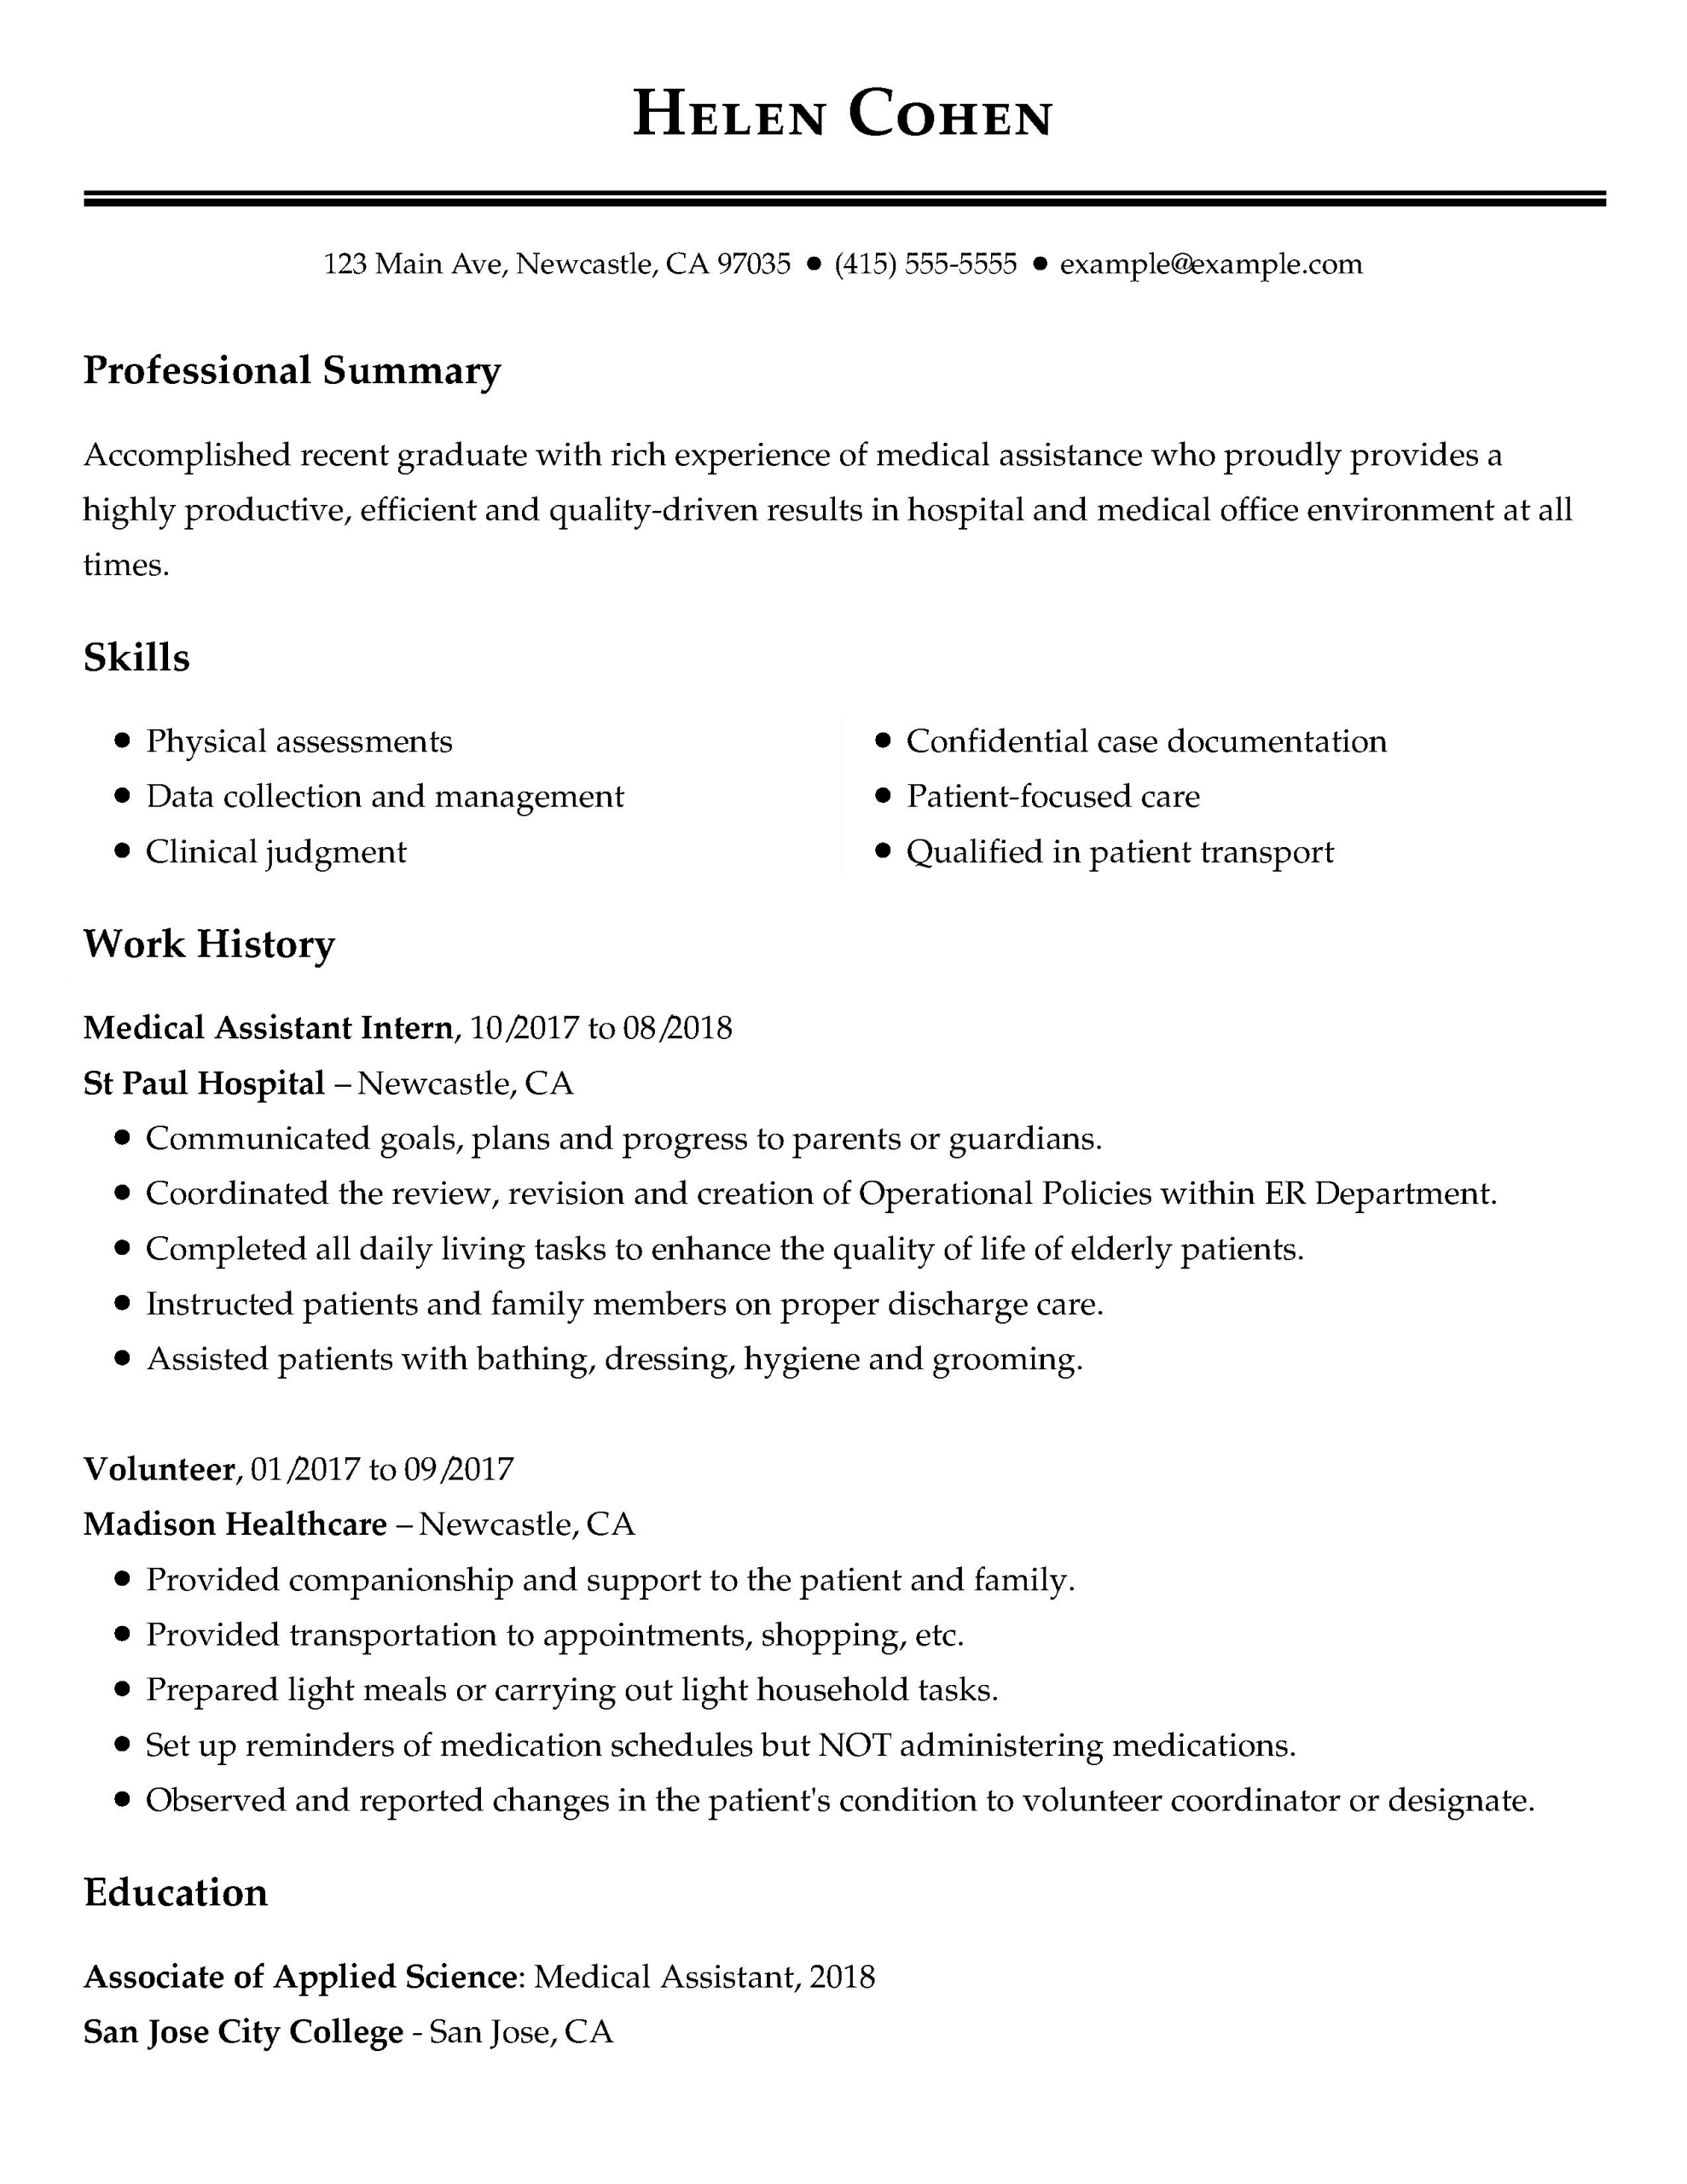 free professional resume templates several work experiences